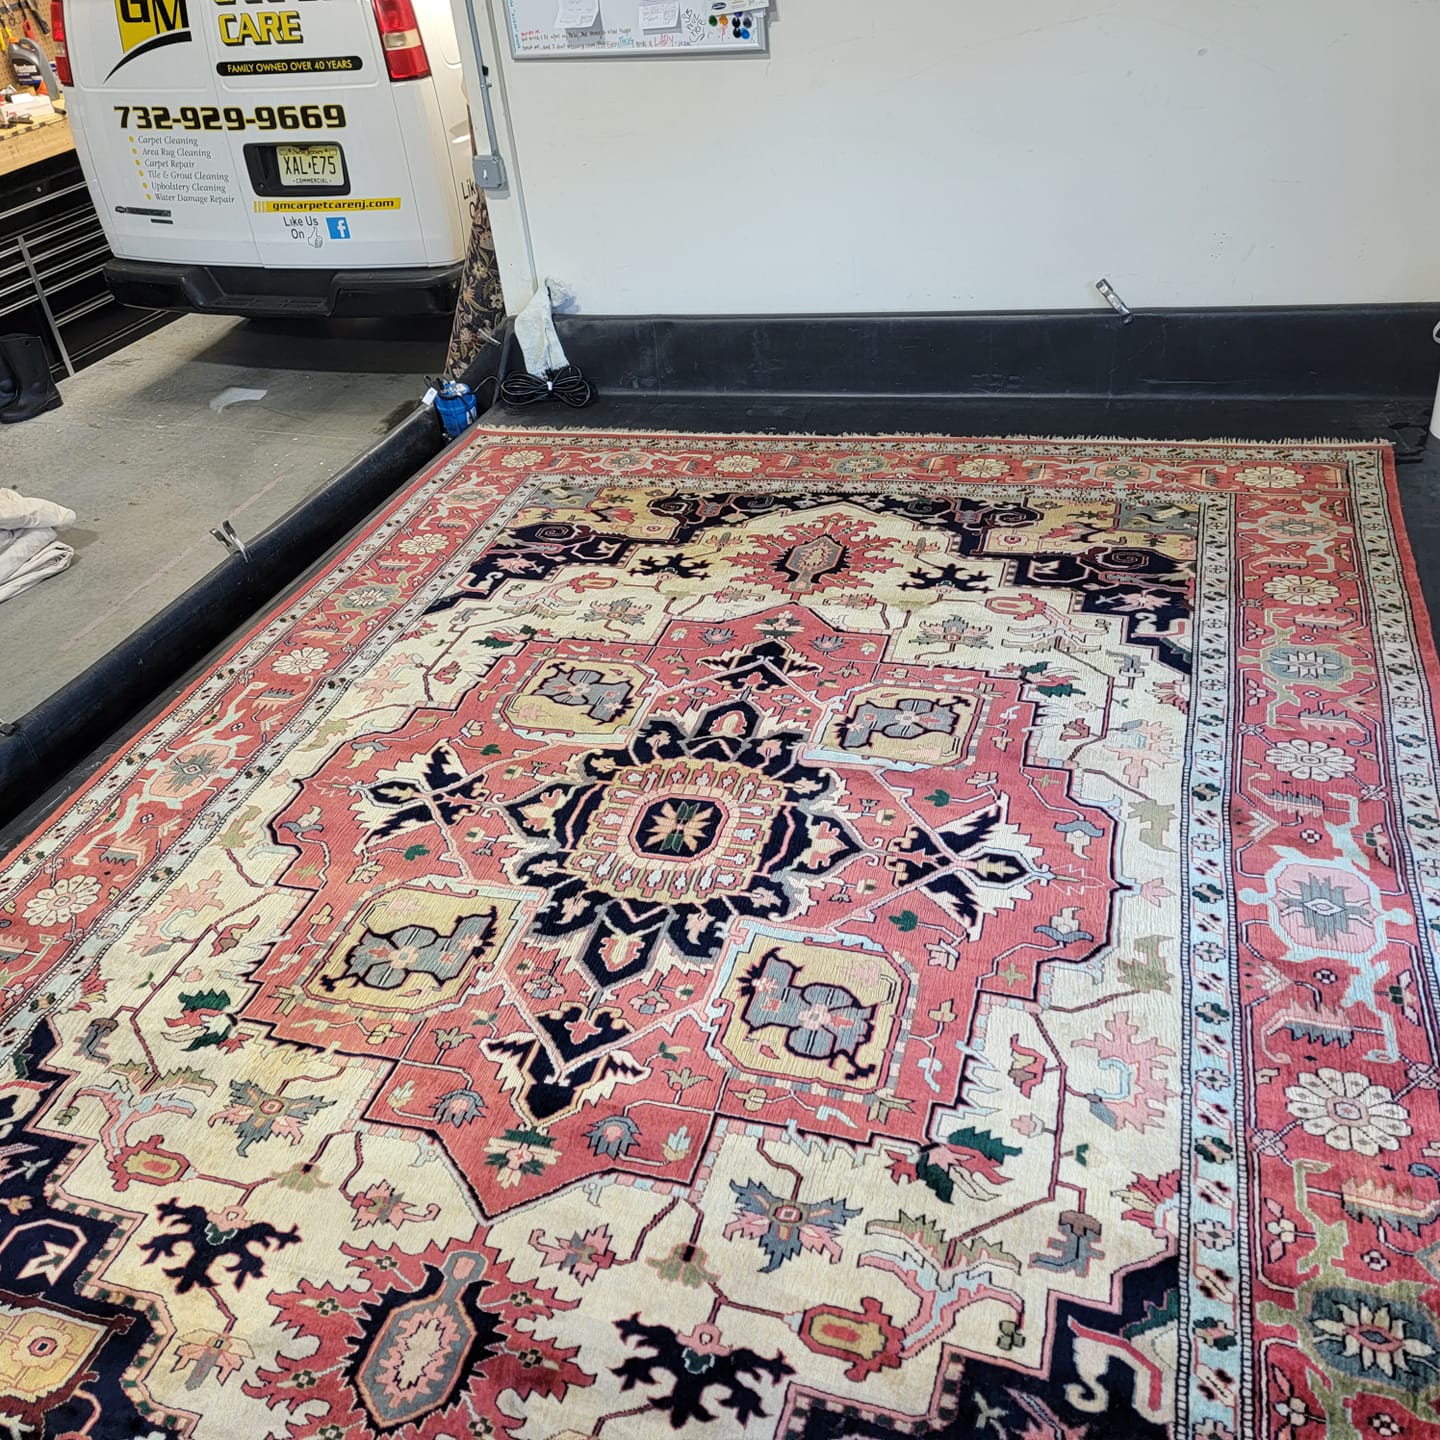 Professional Area Rug Cleaning: What You Need To Know